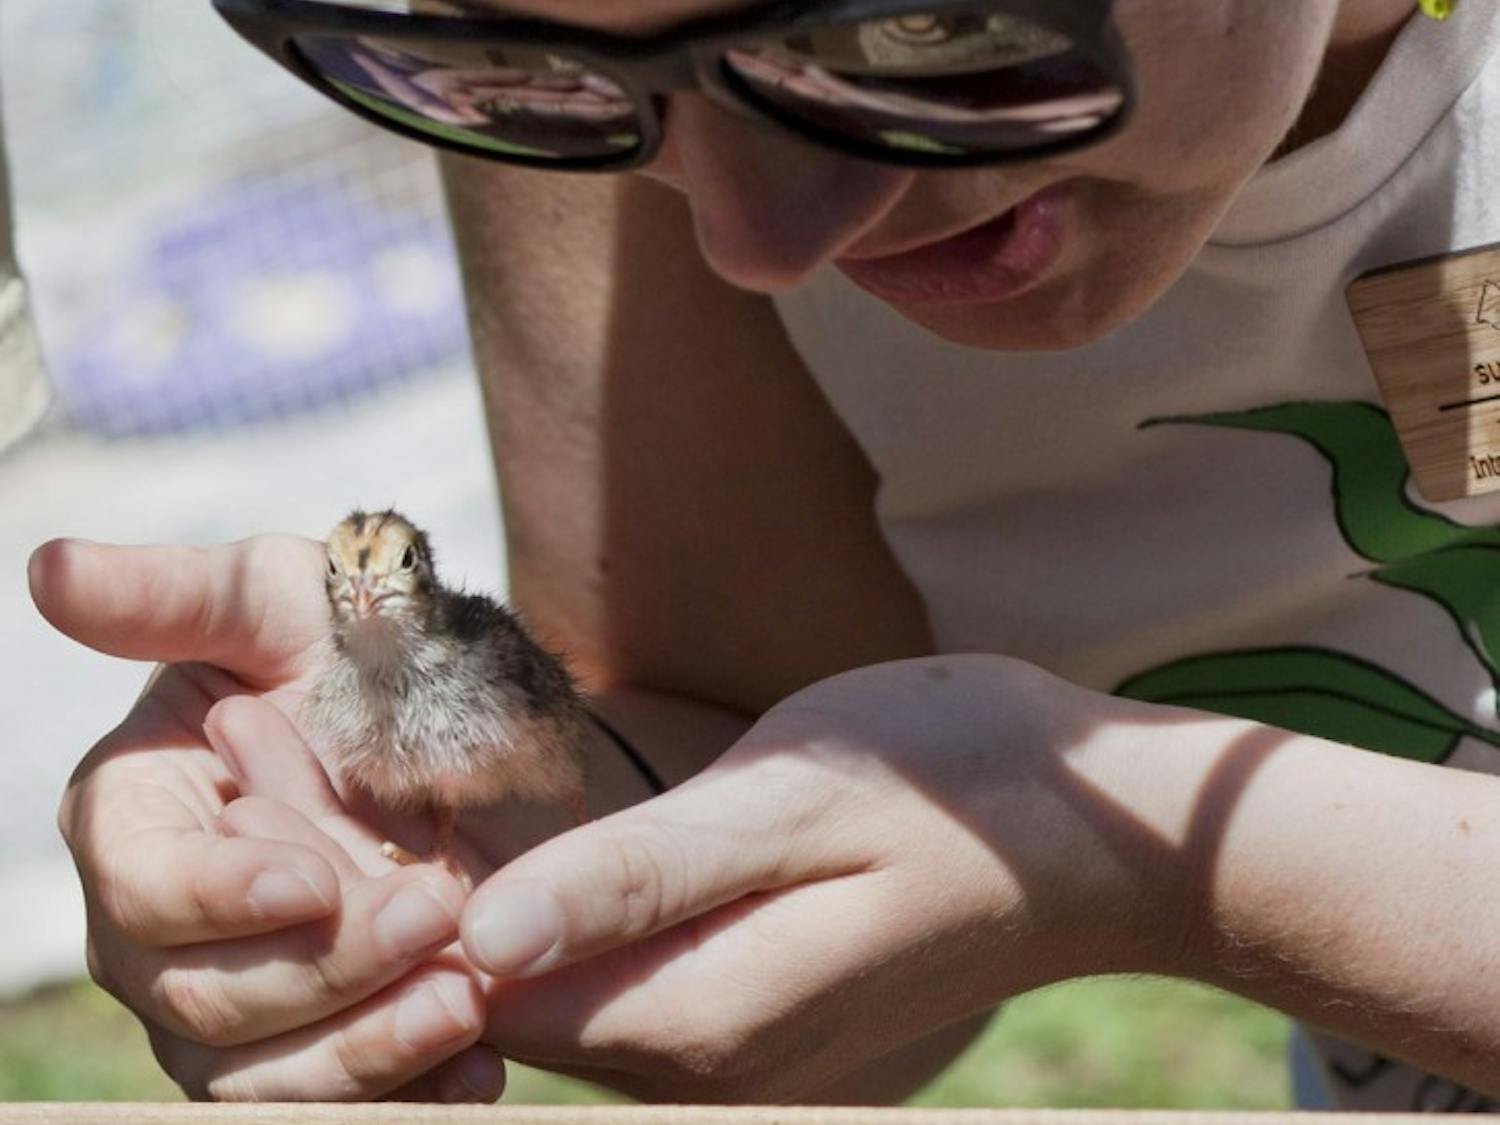 Katie Kafer, a 21-year-old biology senior, returns a coturnix quail to its recycled cardboard shelter at Campus Earth Day on the North Lawn on Friday.